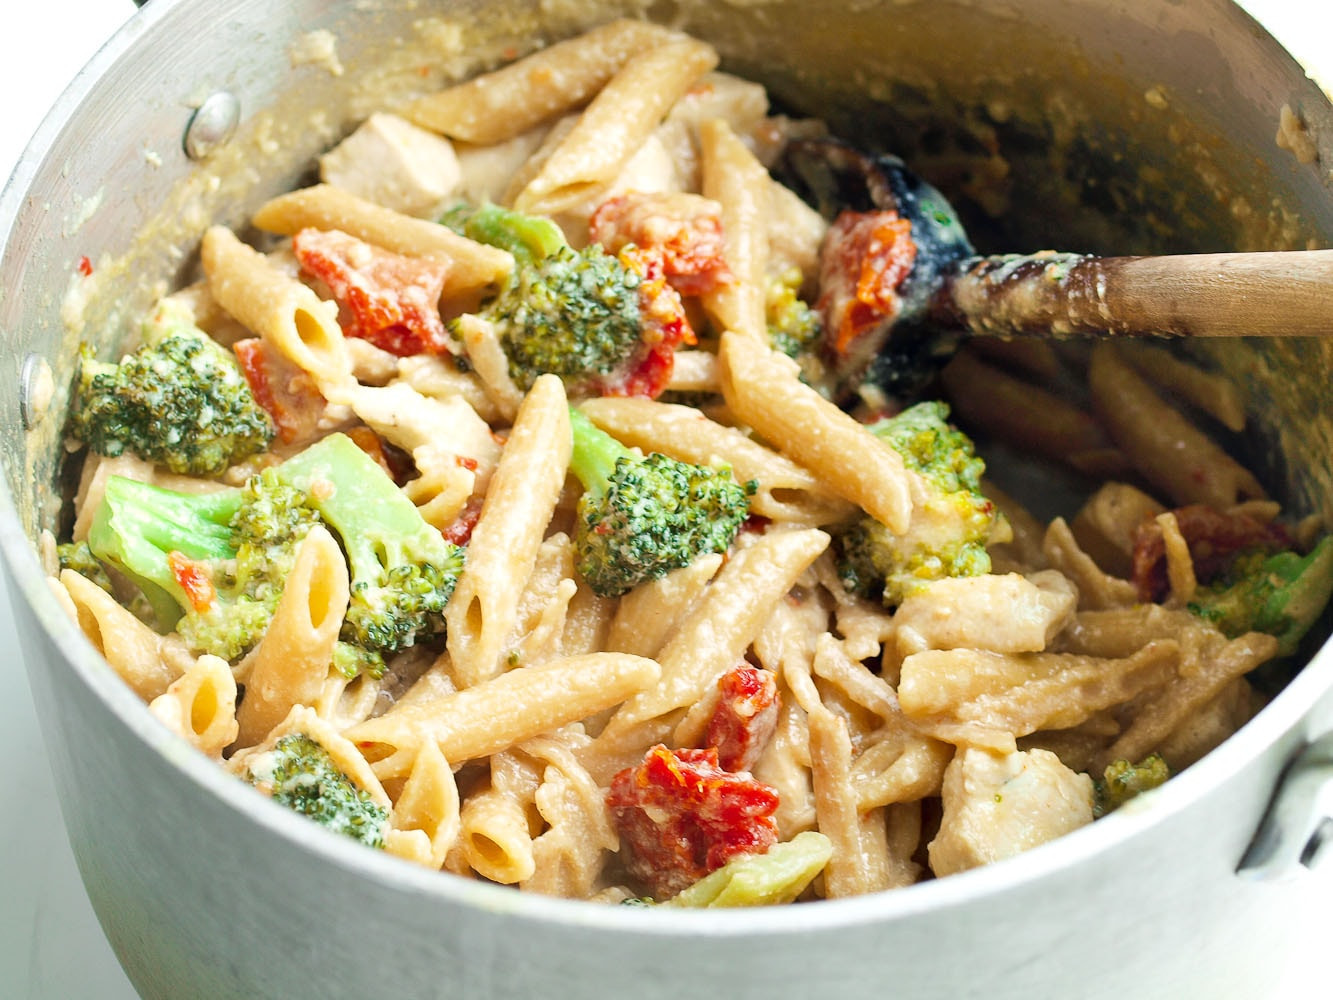 Dinners For One Ideas
 Tangy e Pot Chicken and Veggie Pasta Dinner